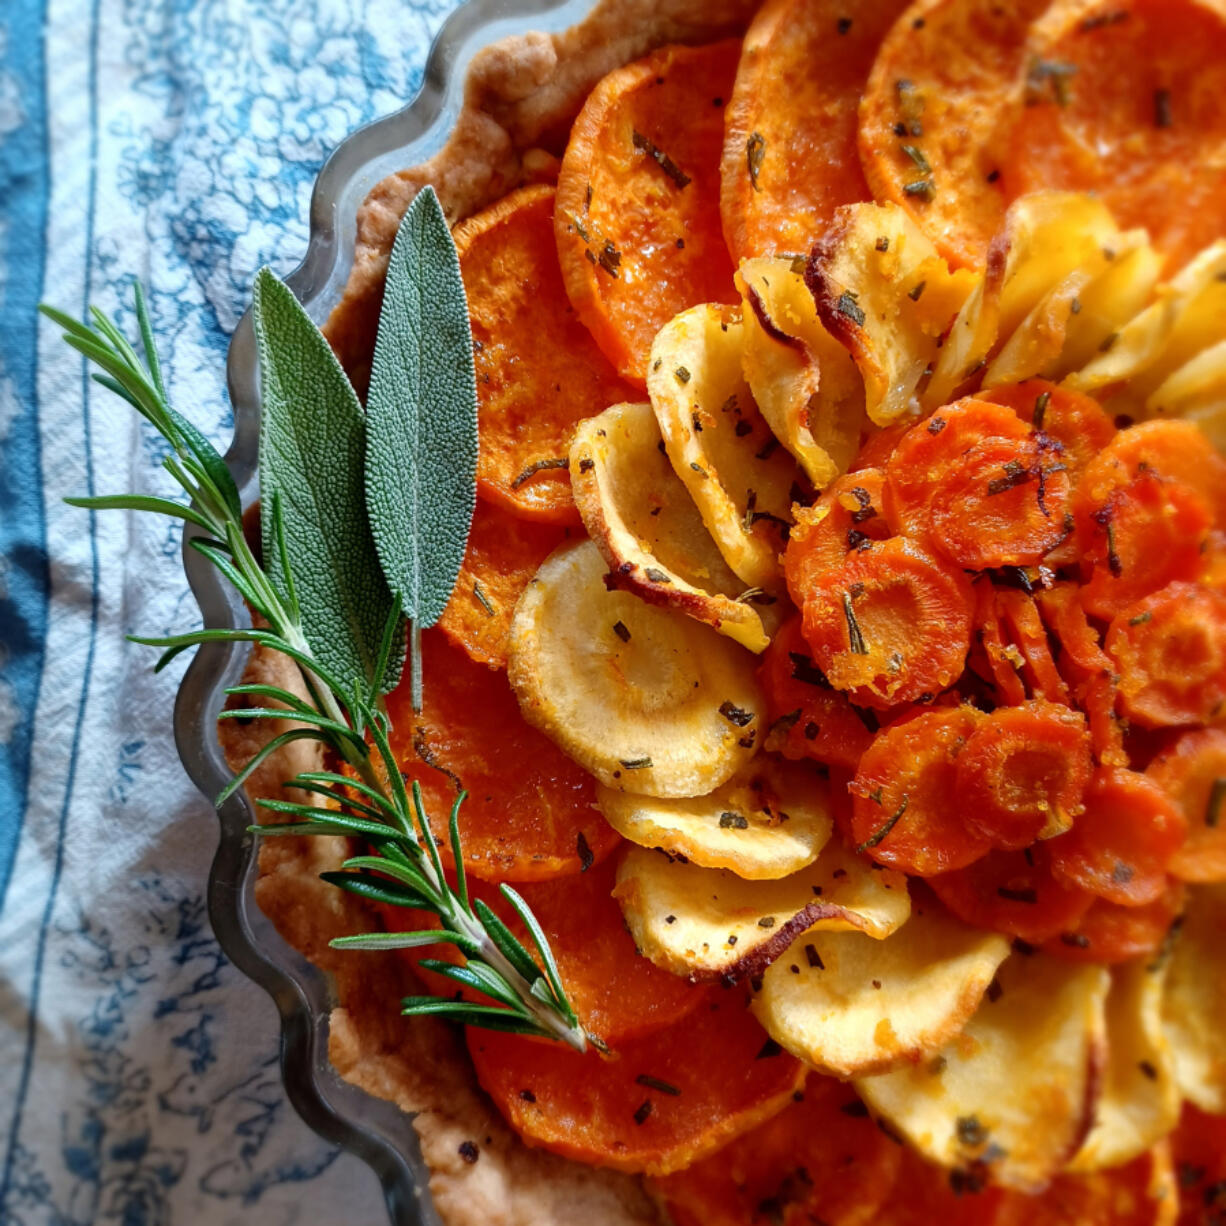 This root vegetable tart might look pretty, but it is absolutely awful.